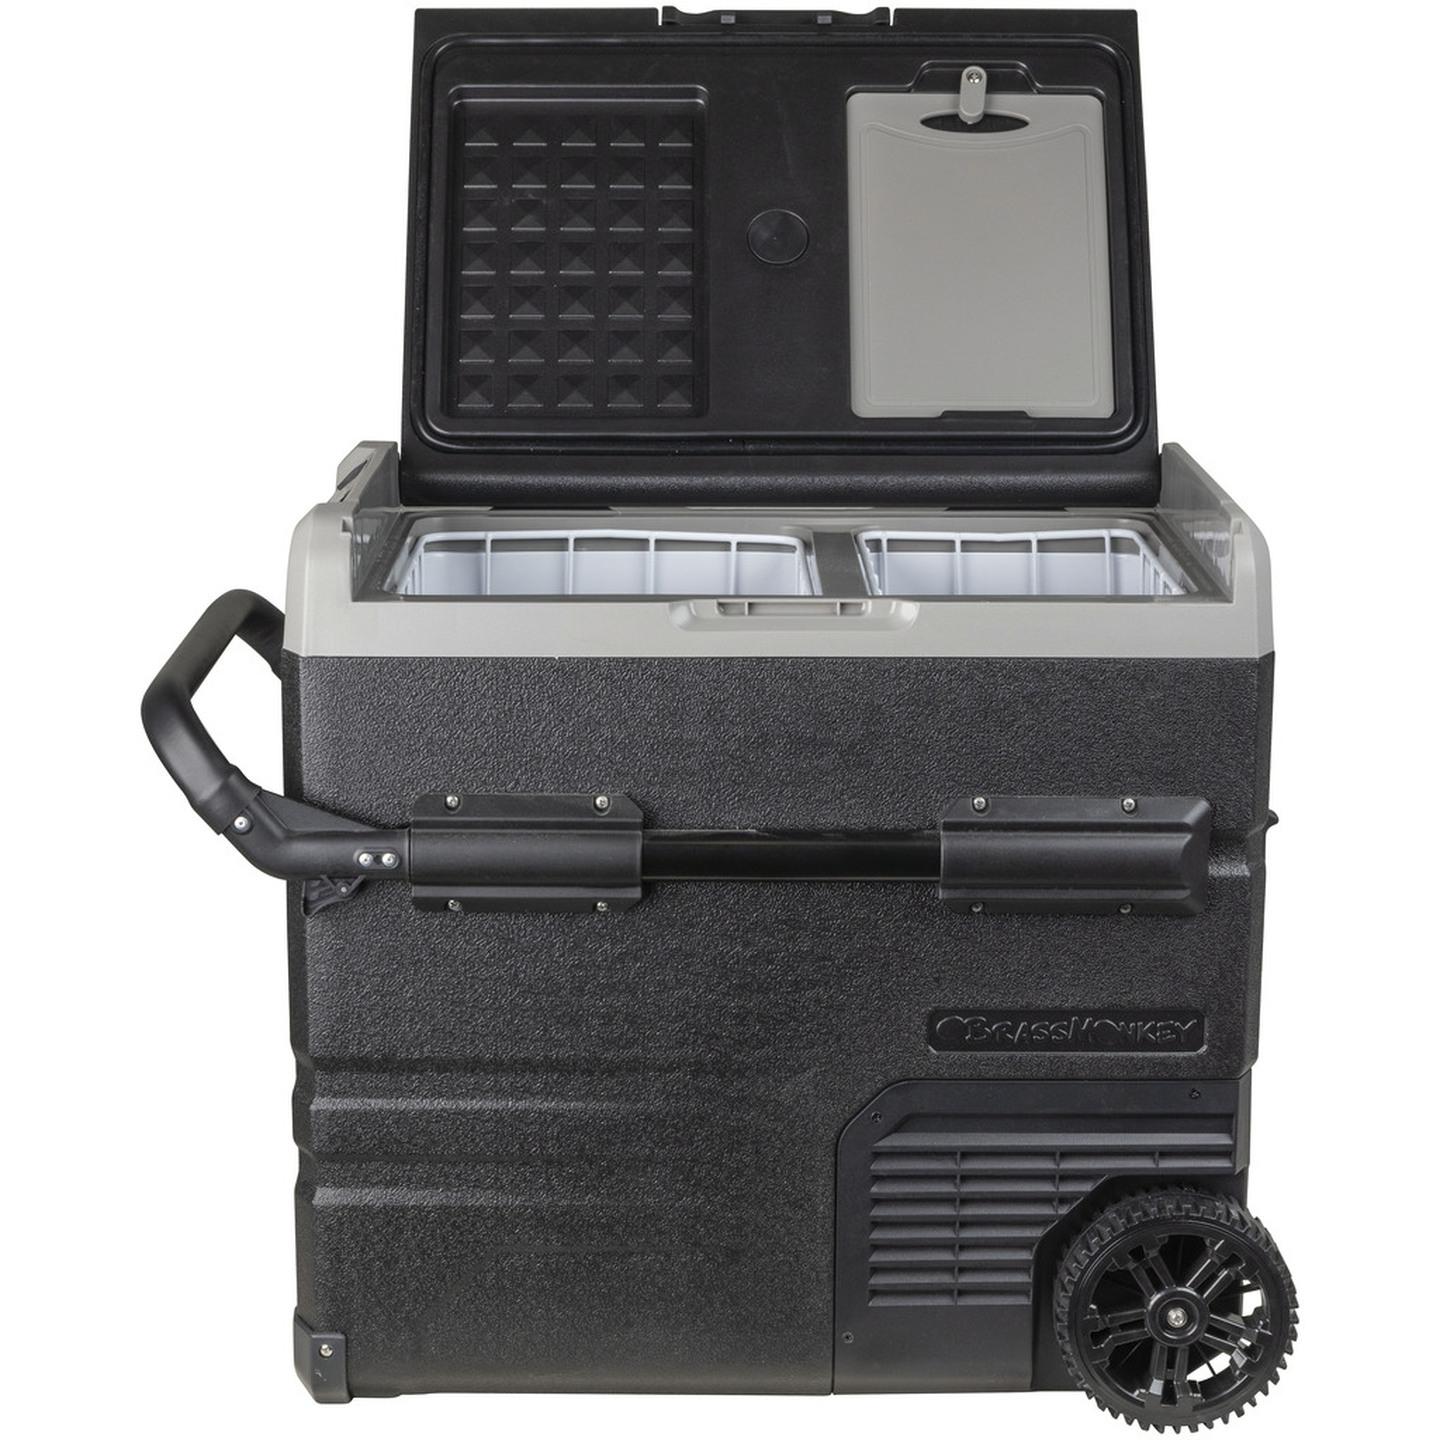 35L Brass Monkey Portable Dual Zone Fridge/Freezer with Wheels and Battery Compartment